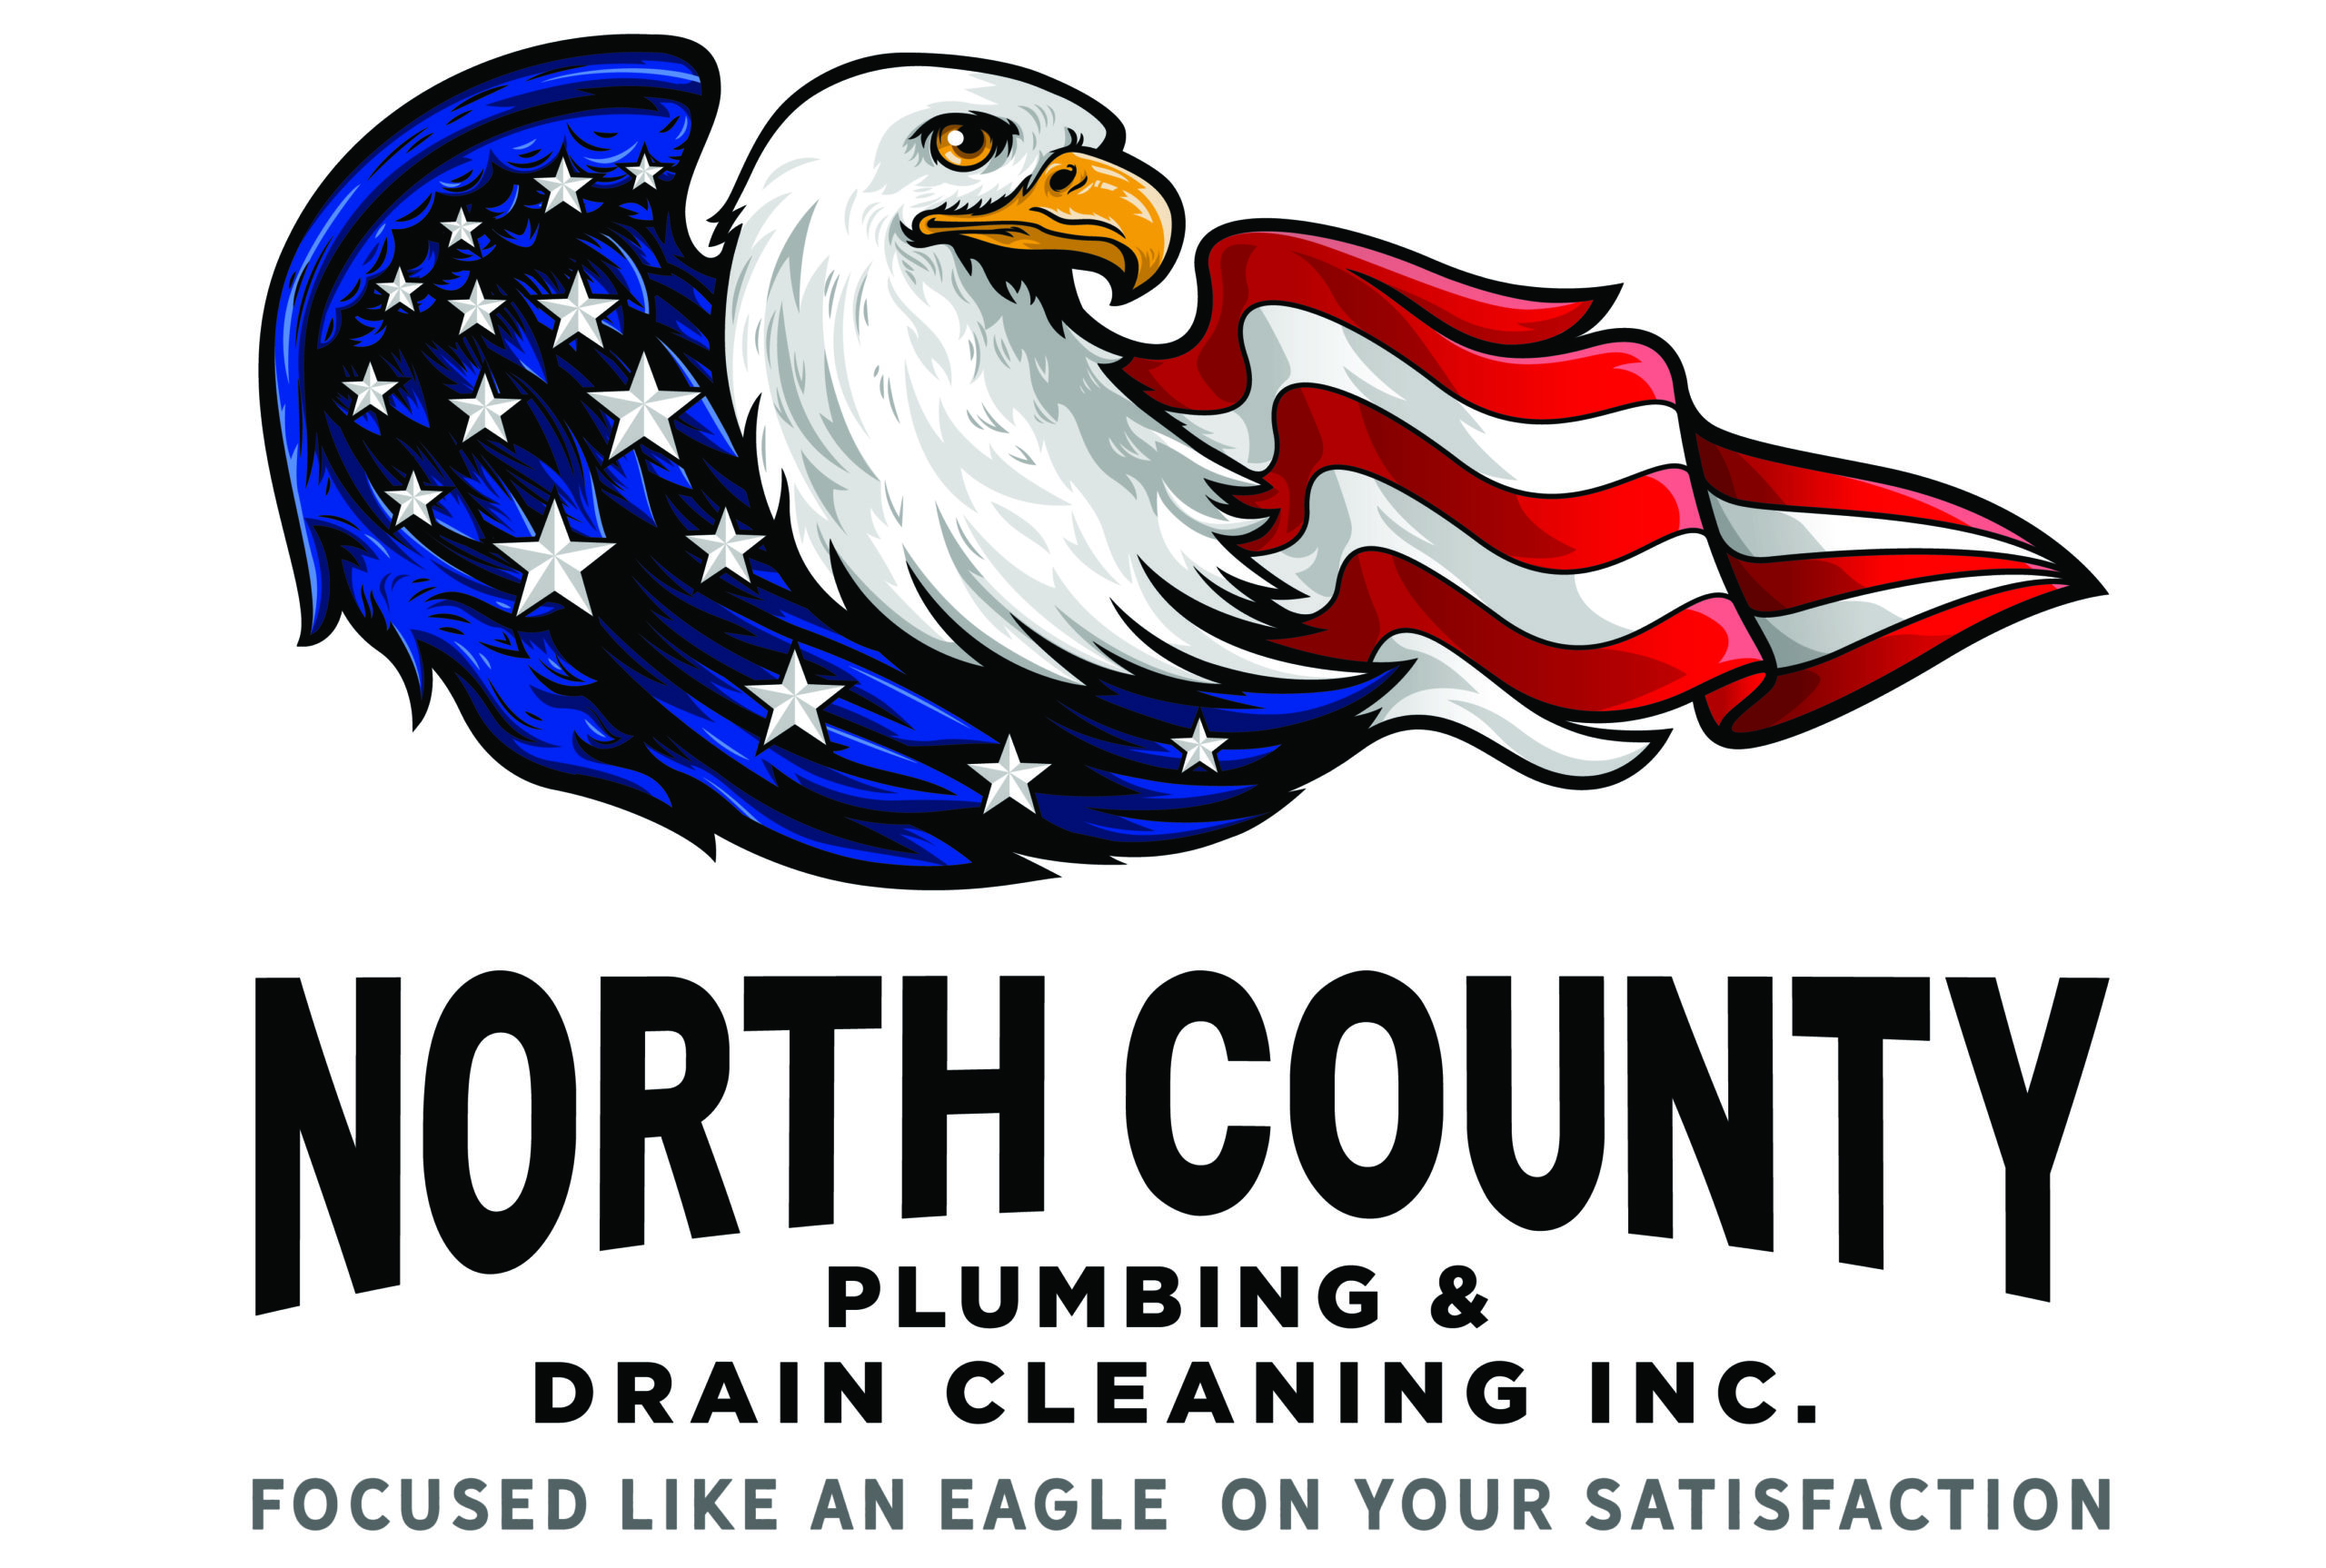 North County Plumbing & Drain Cleaning Inc.